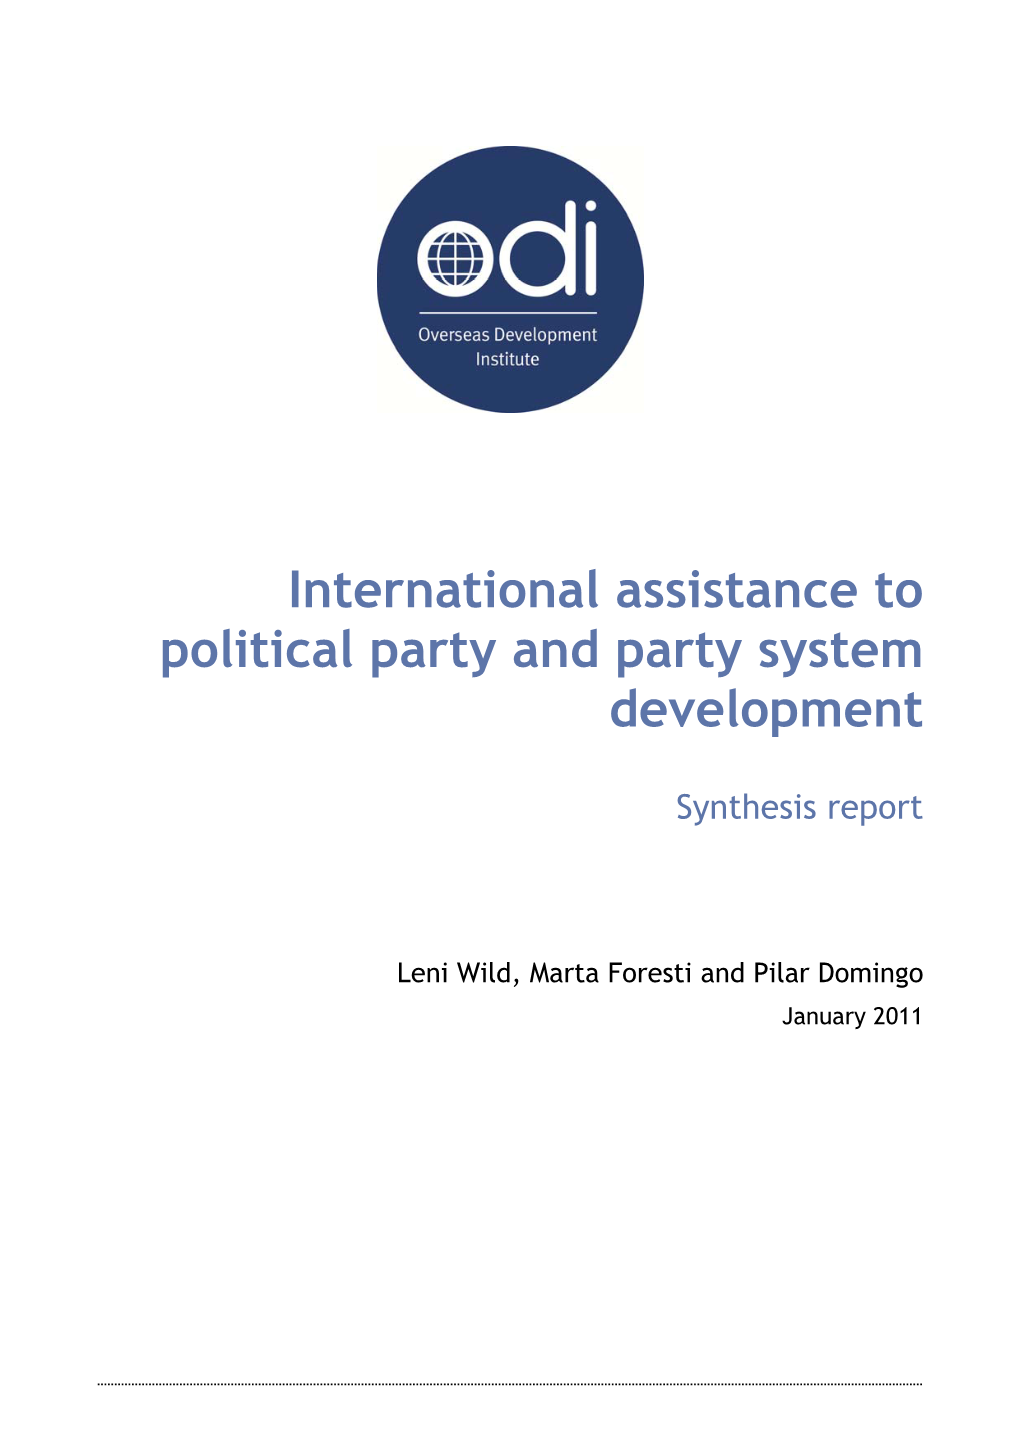 International Assistance to Political Party and Party System Development